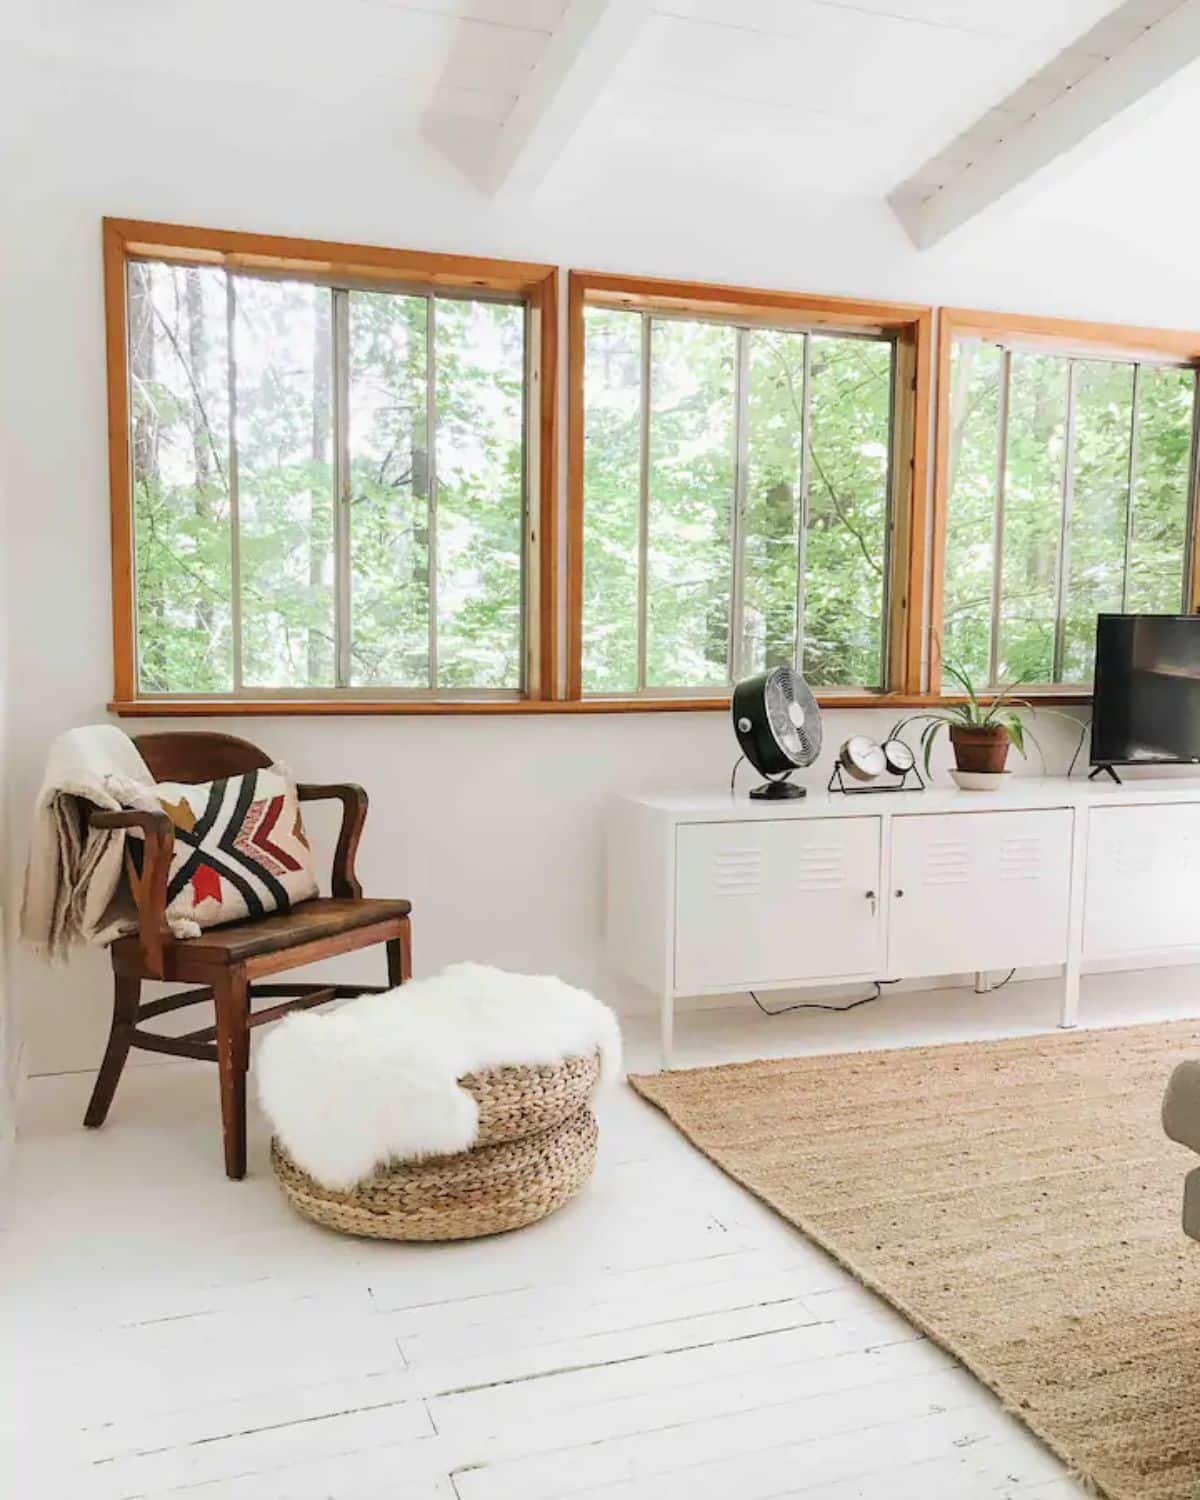 The cabin's living area, with cozy and rustic decor, featuring lots of windows that allow for an airy and bright atmosphere